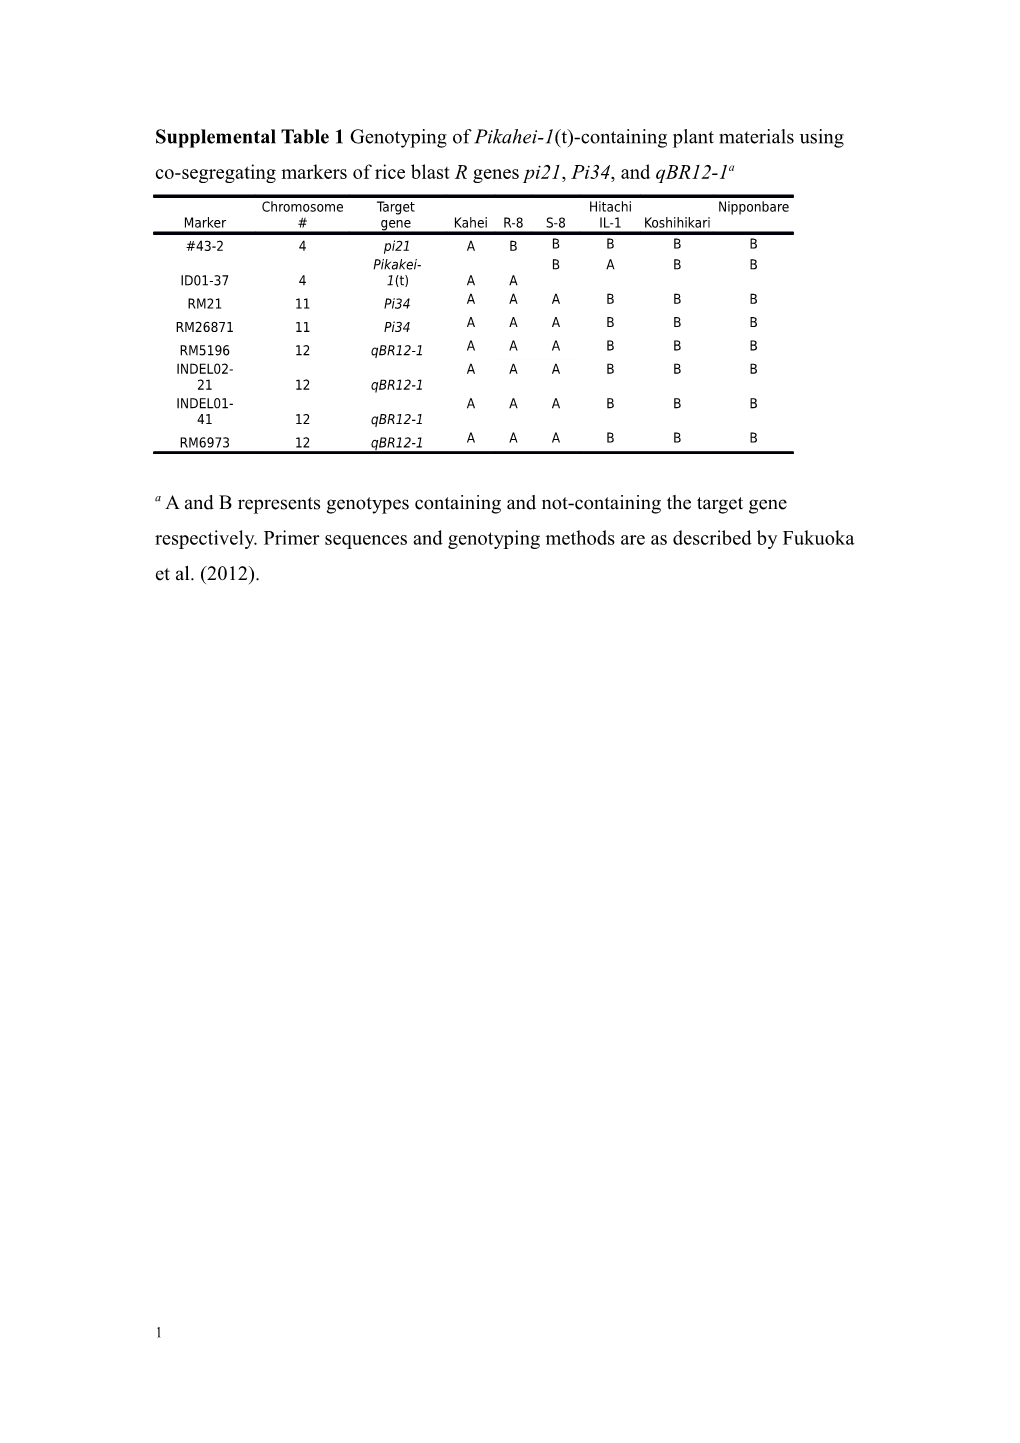 Supplemental Table1 Genotyping of Pikahei-1(T)-Containing Plant Materials Using Co-Segregating